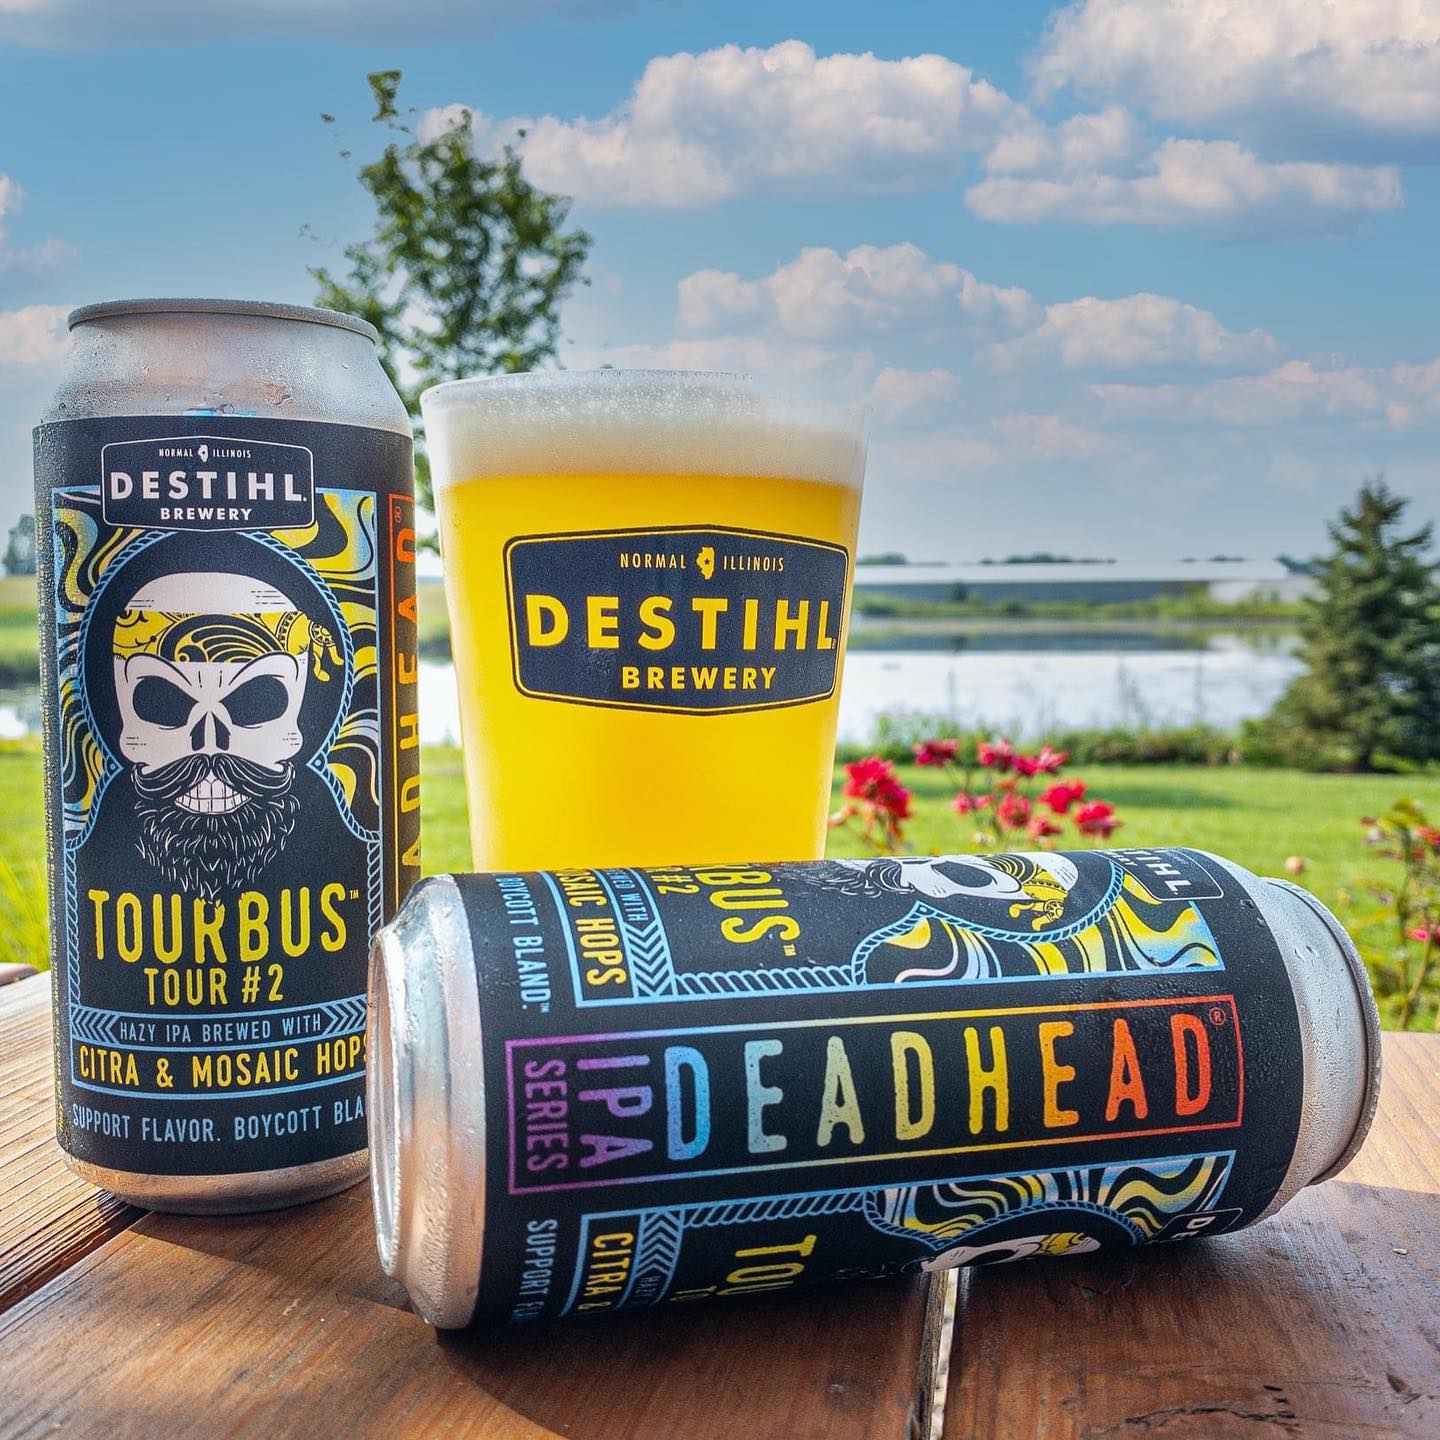 On a bright and sunny day, two beer cans and a glass of light beer are on a wooden picnic table. The two beers won awards, and TourBus is standing up and Deadhead can is sideways. Photo from Destihl Brewery's Facebook page.